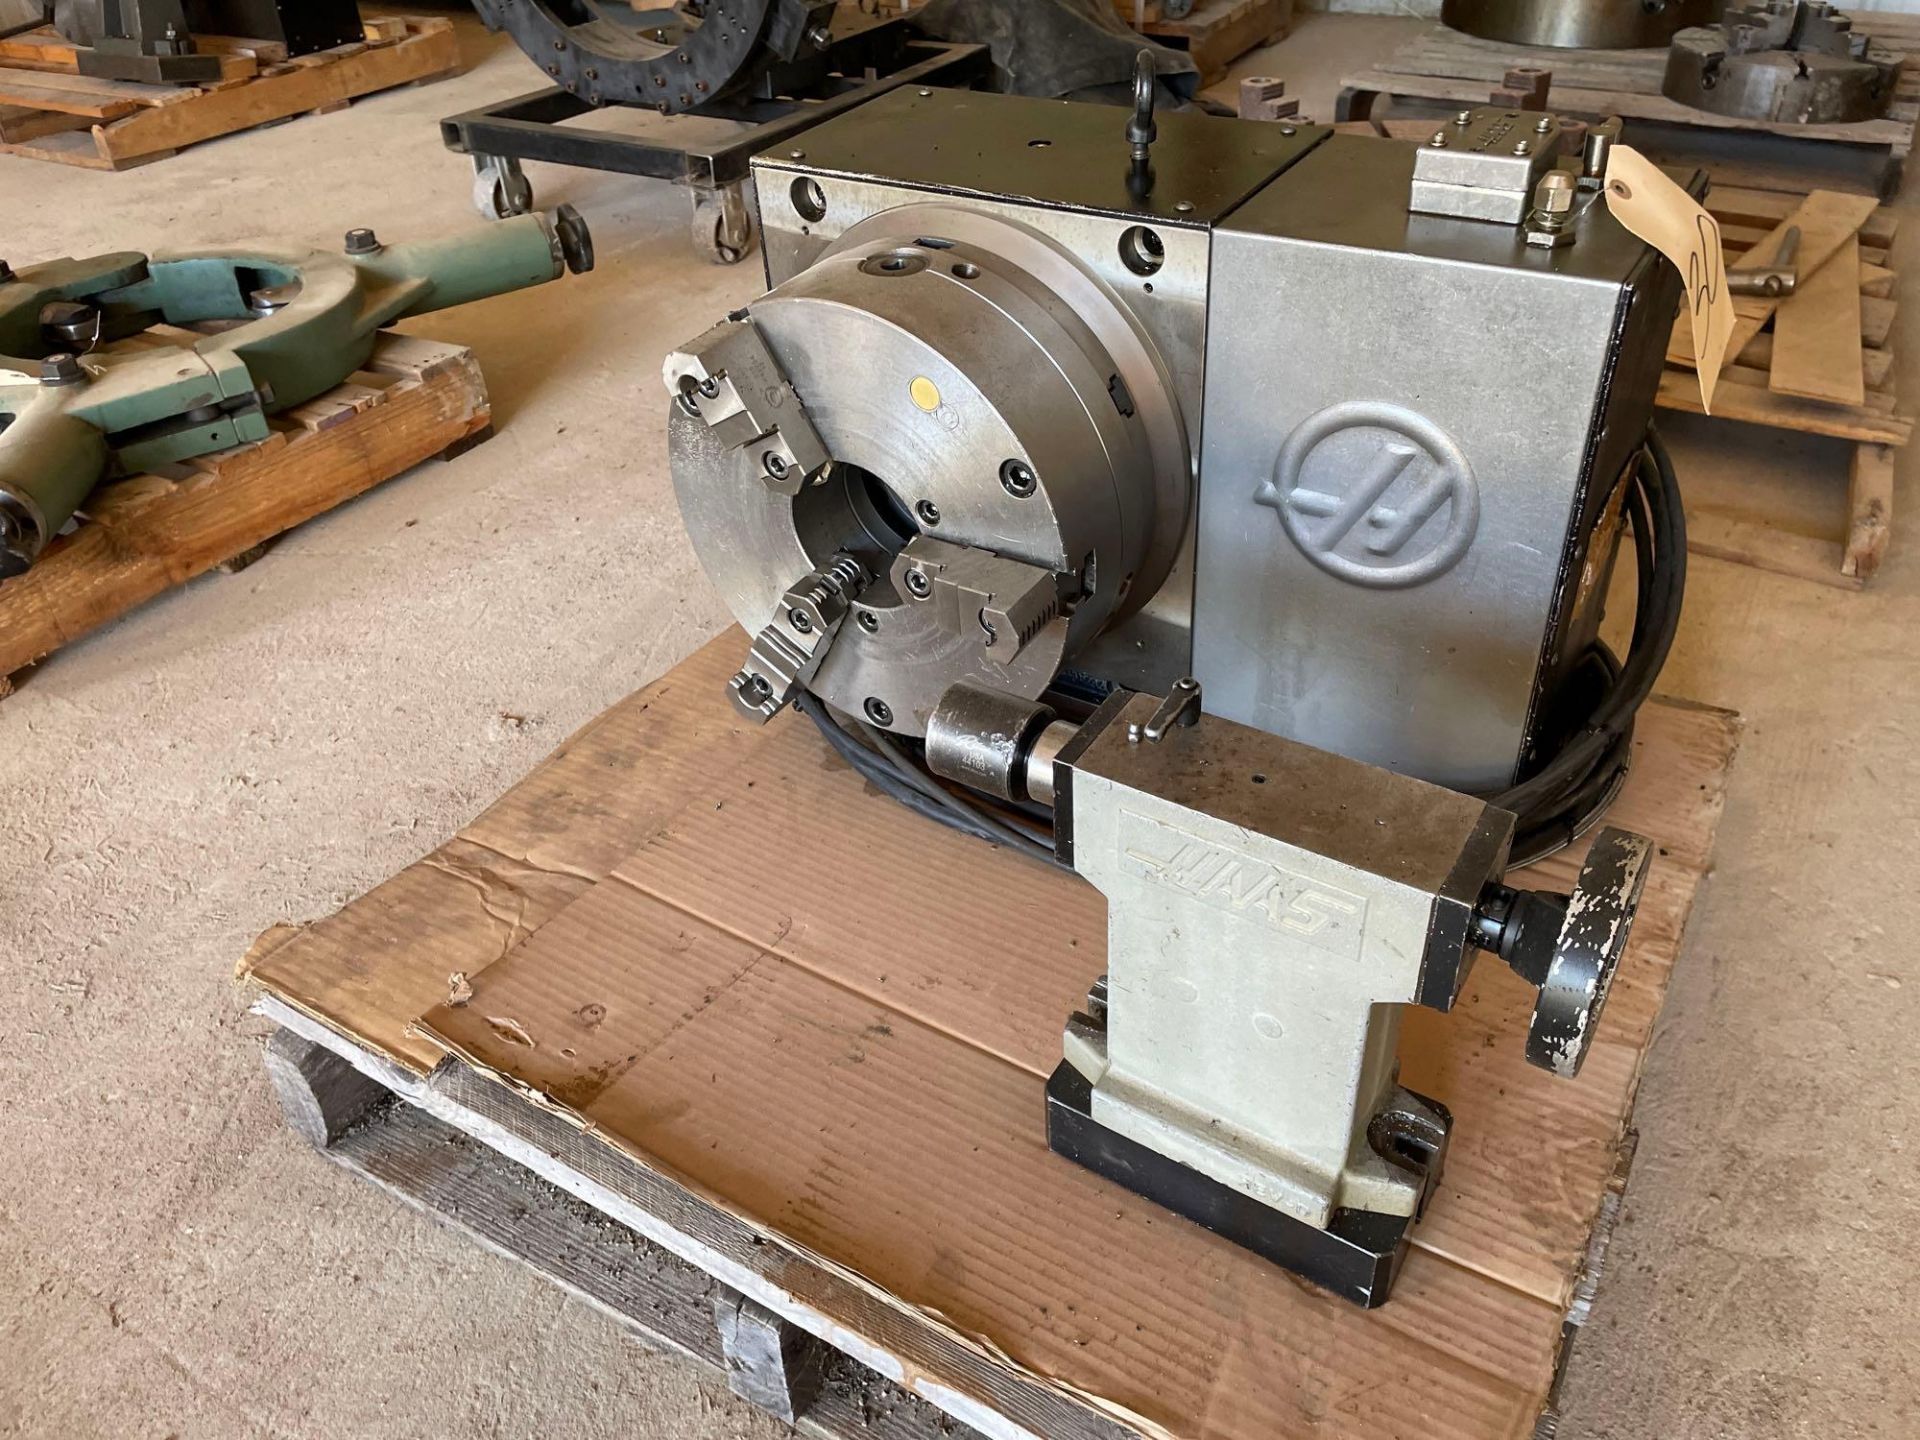 Haas 4th Axis with 12 1/2” 3 Jaw Chuck for Haas VF3, Model HRT 310, S/N 317167 - Image 2 of 4